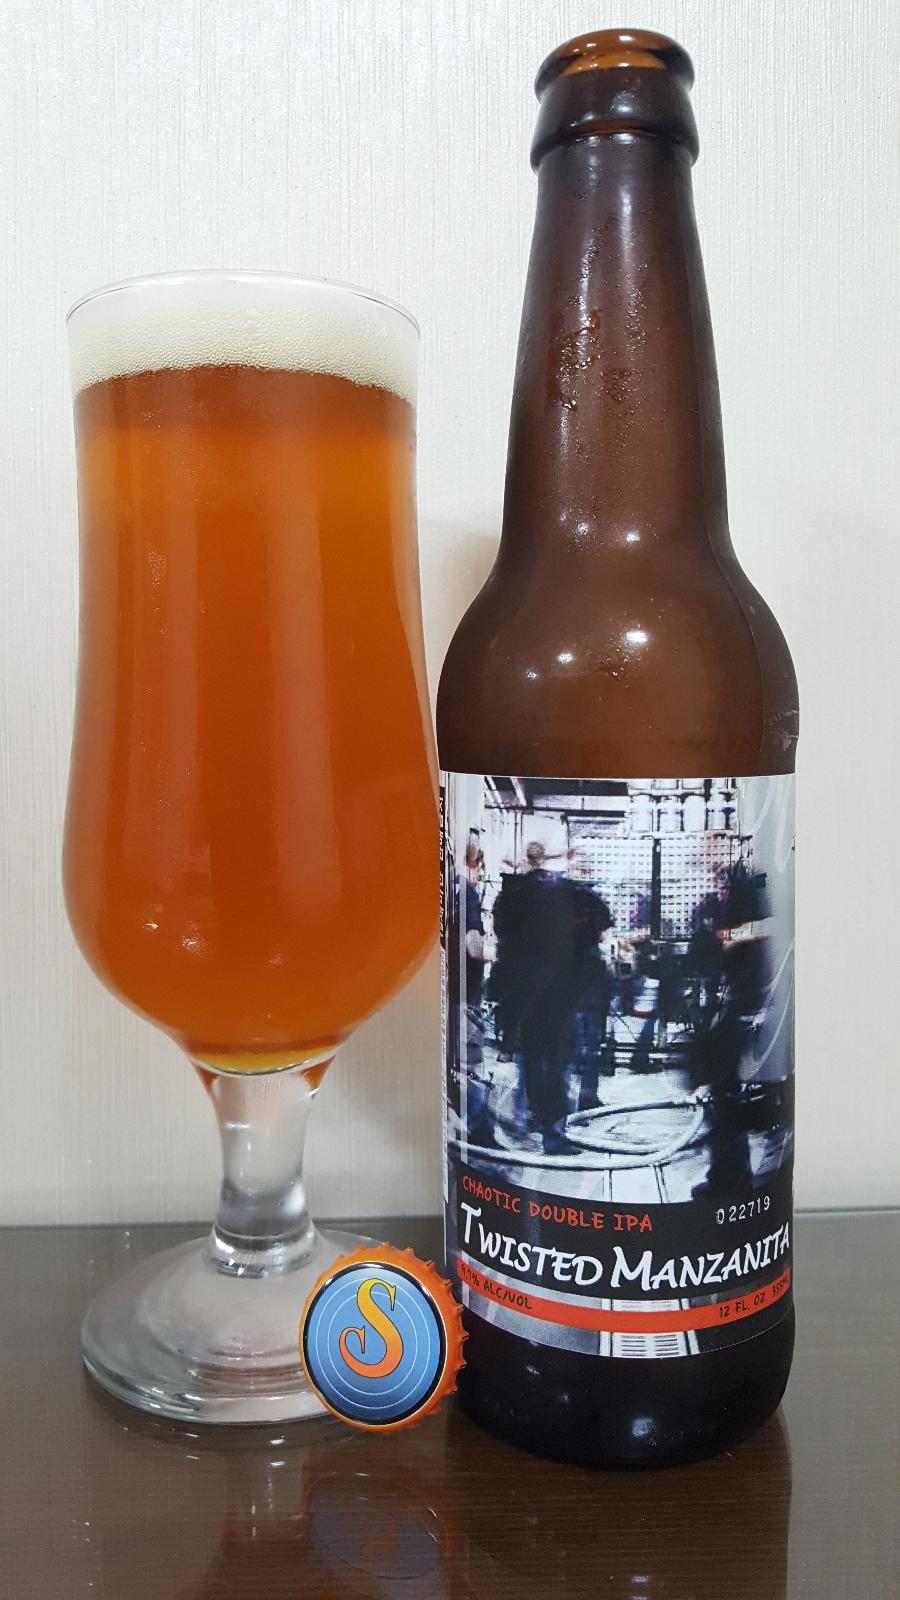 Chaotic Double IPA